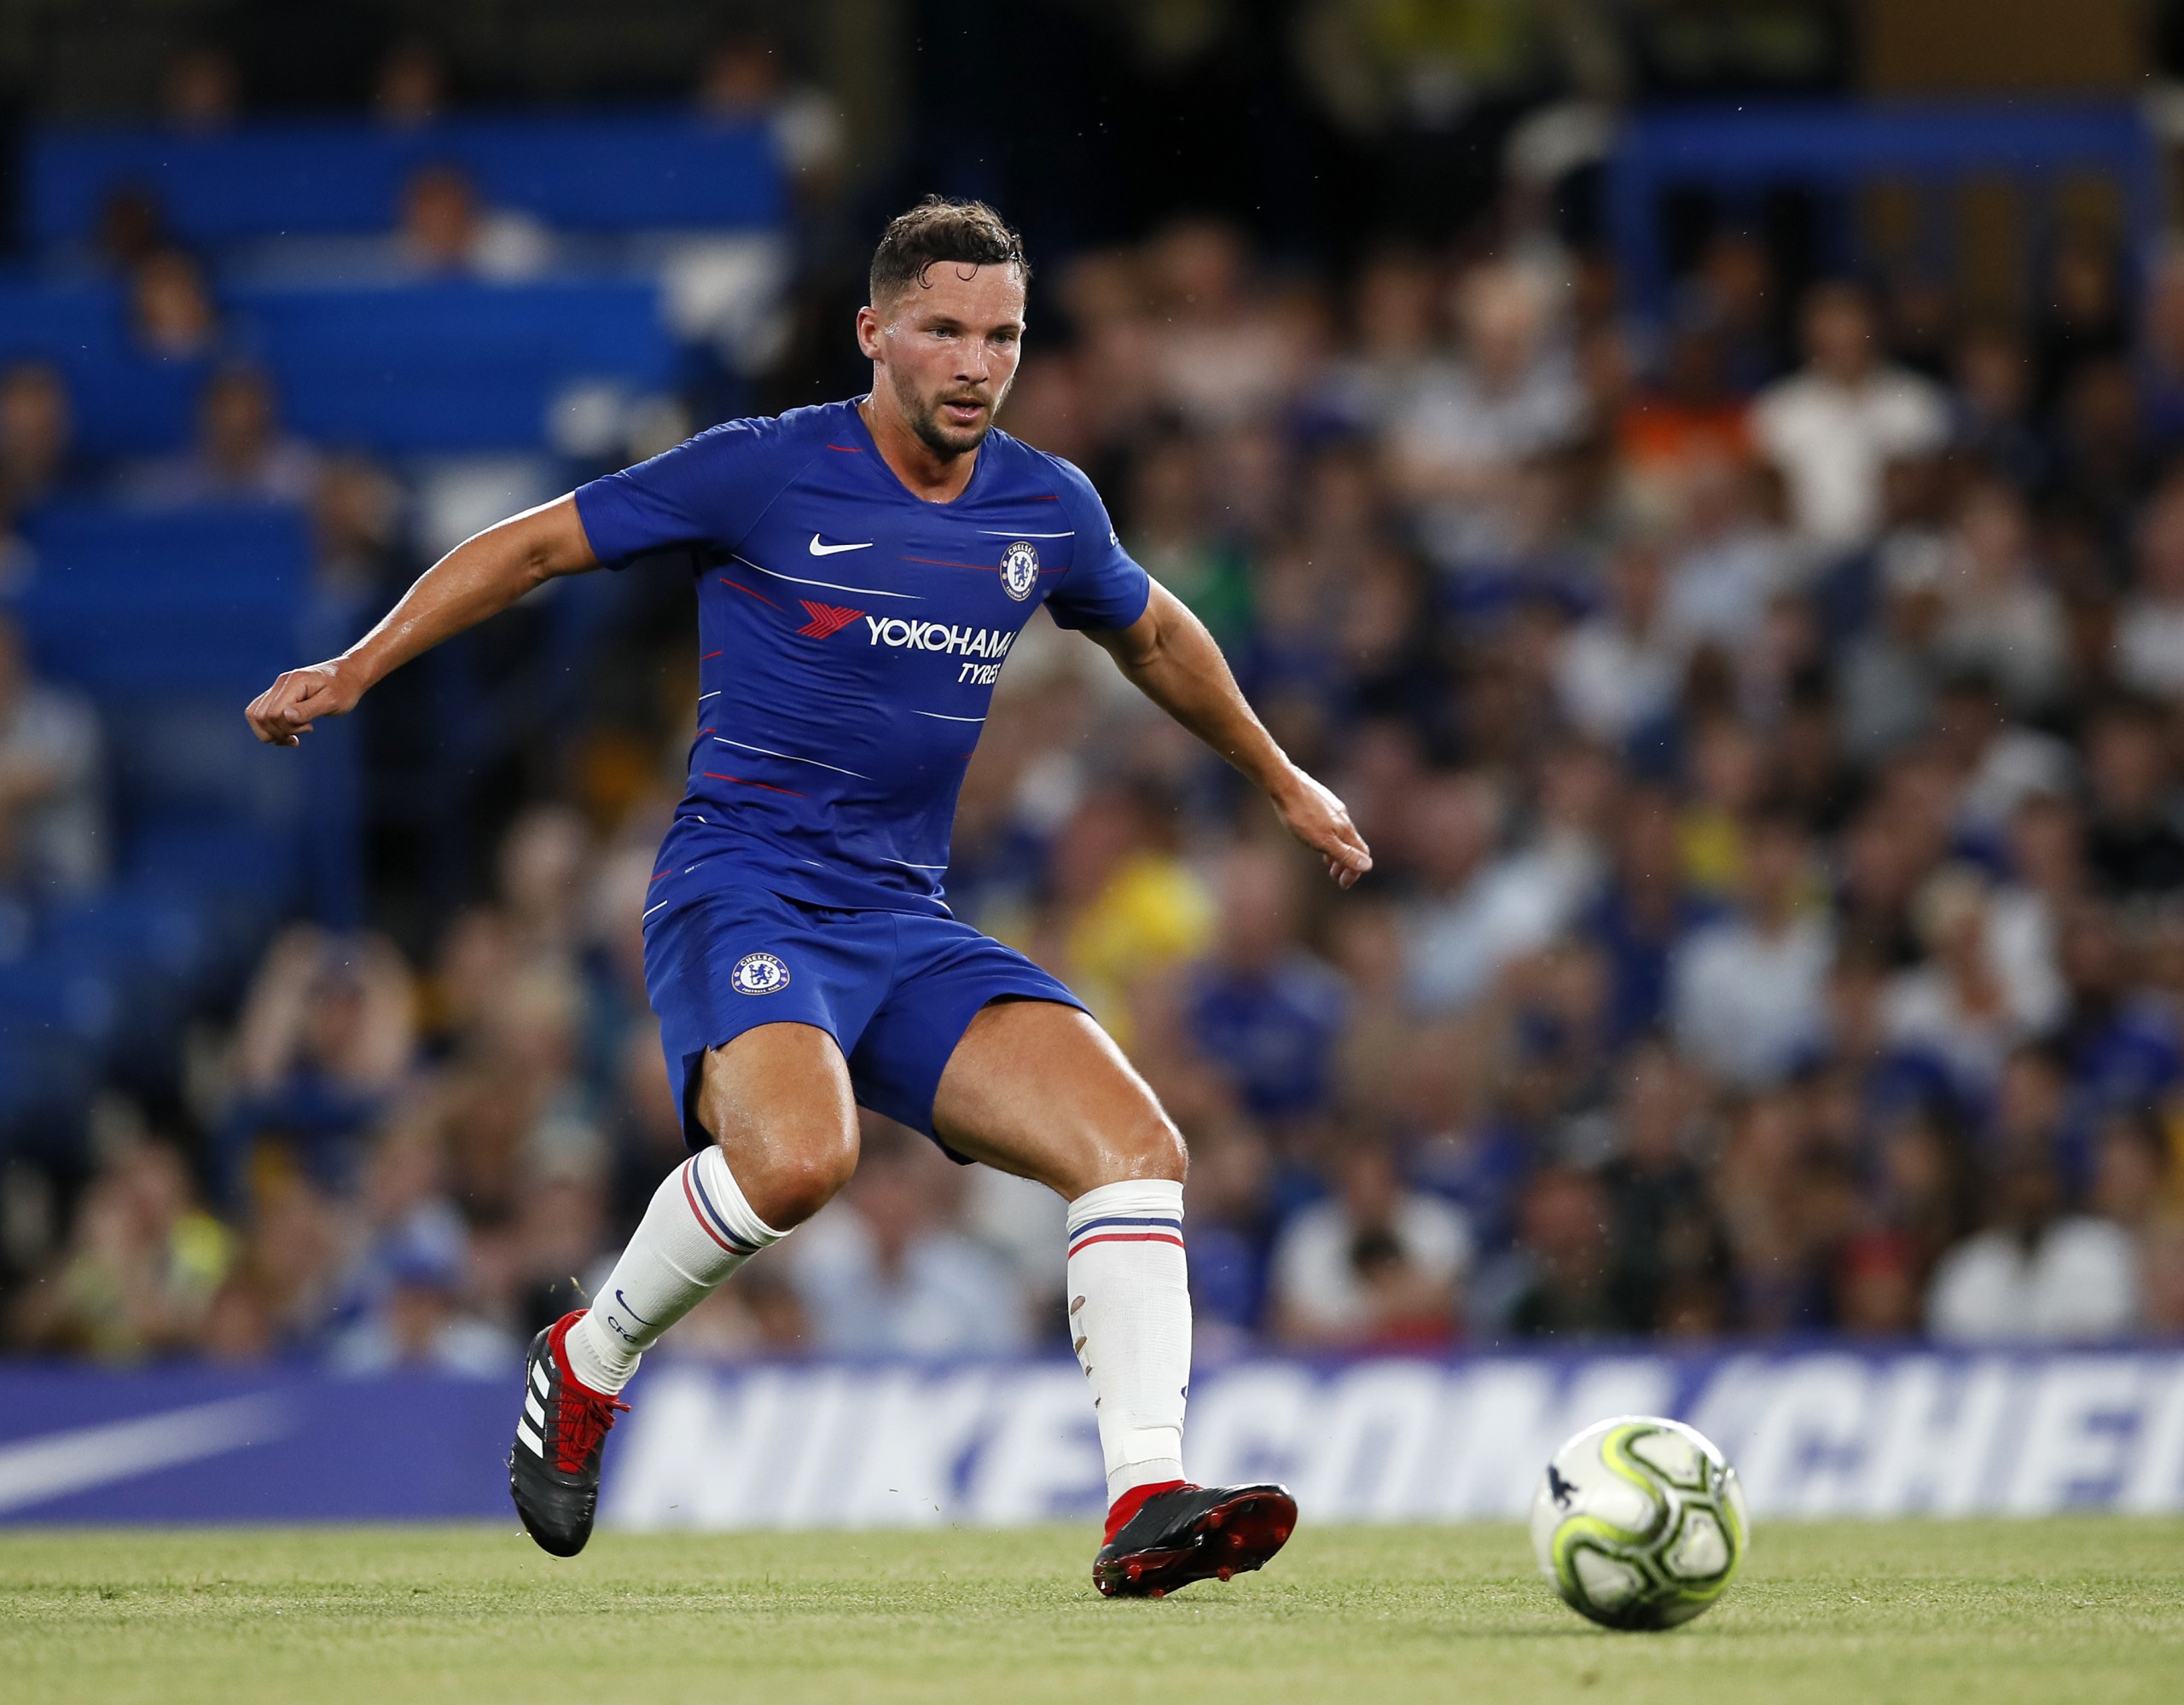 August 7, 2018 - London, United Kingdom - Chelsea''s Danny Drinkwater in action during the pre-season friendly match at Stamford Bridge Stadium, London. Picture date 7th August 2018. Picture credit should read: David Klein/Sportimage(Credit Image: © David Klein/CSM via ZUMA Wire) (Cal Sport Media via AP Images)